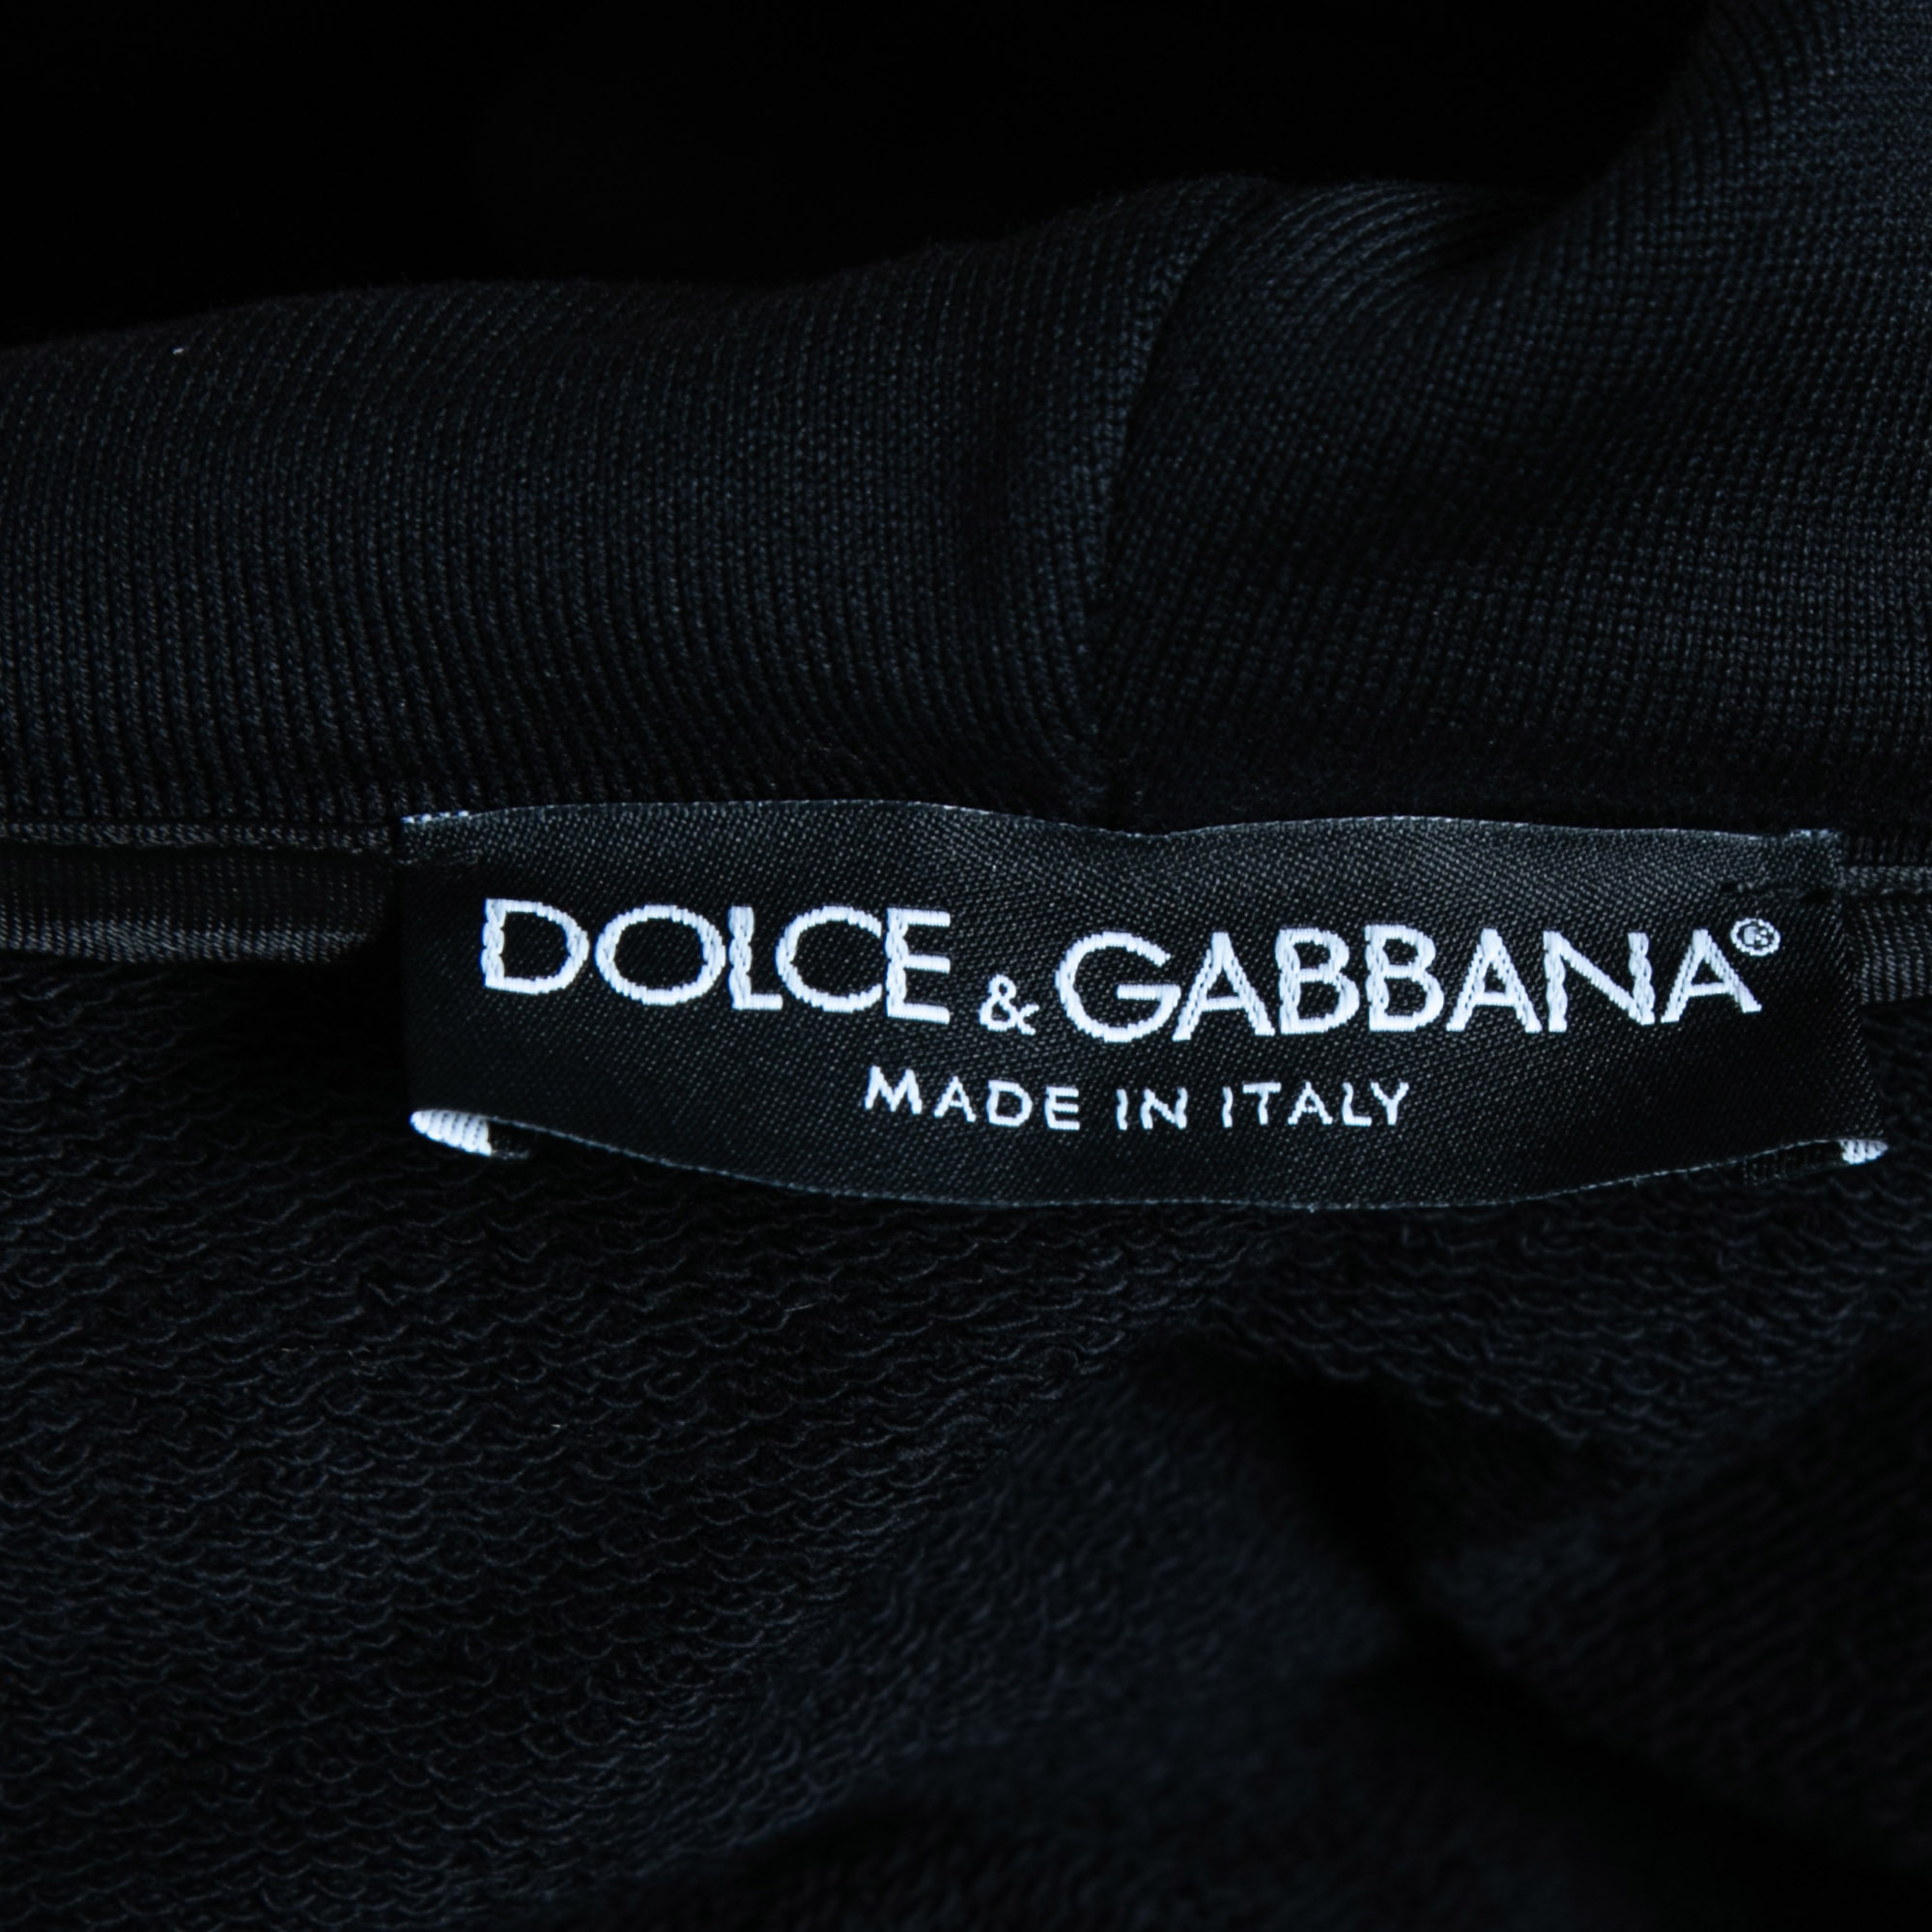 Dolce & Gabbana Black Embroidered Cotton Knit Hooded Sweat Jacket 3XL